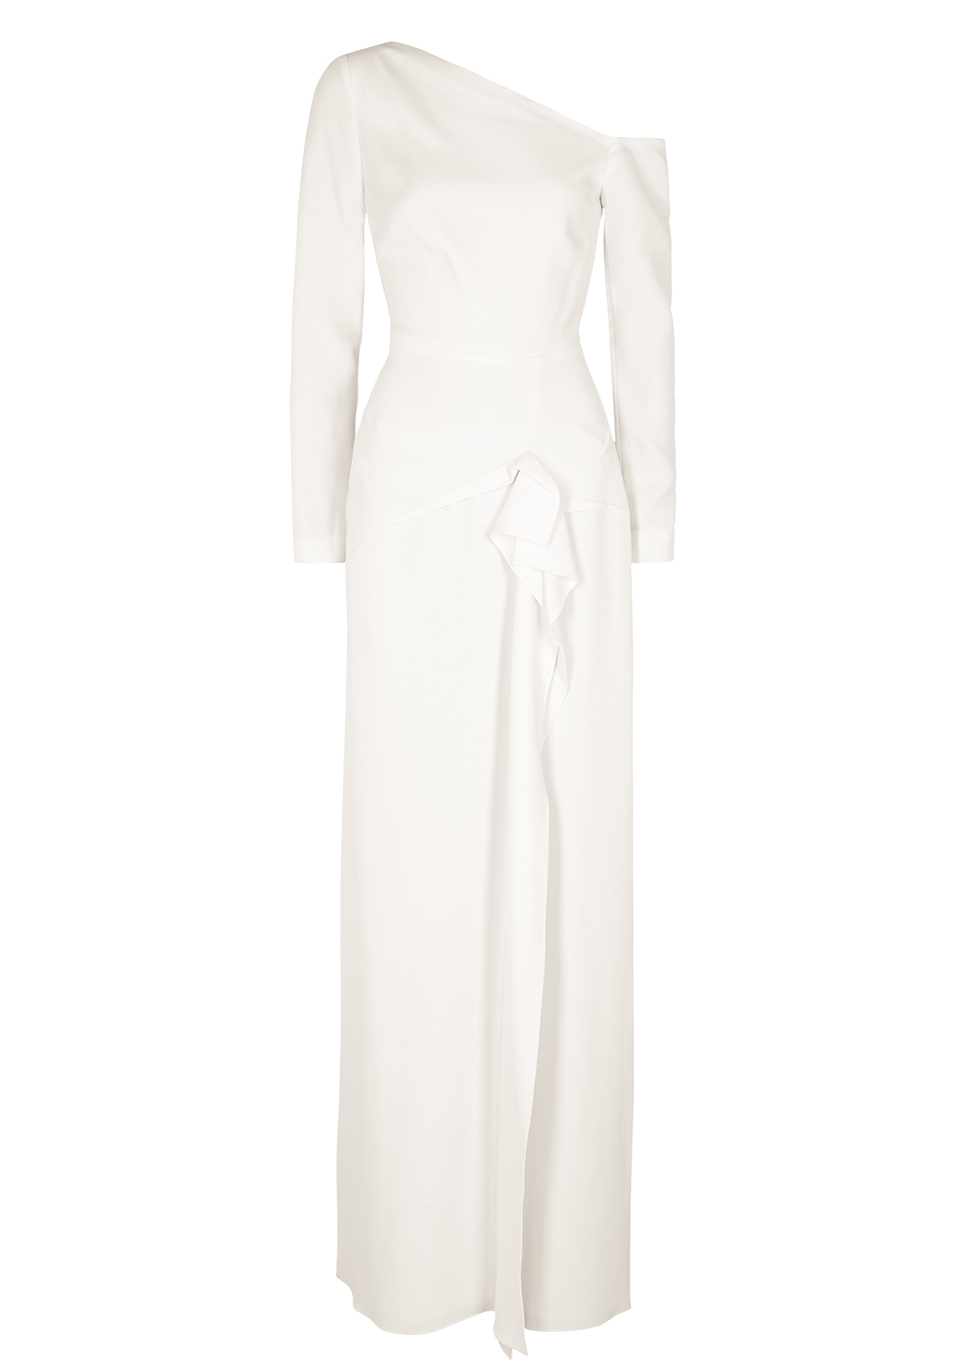 Salona white ruffle-trimmed gown